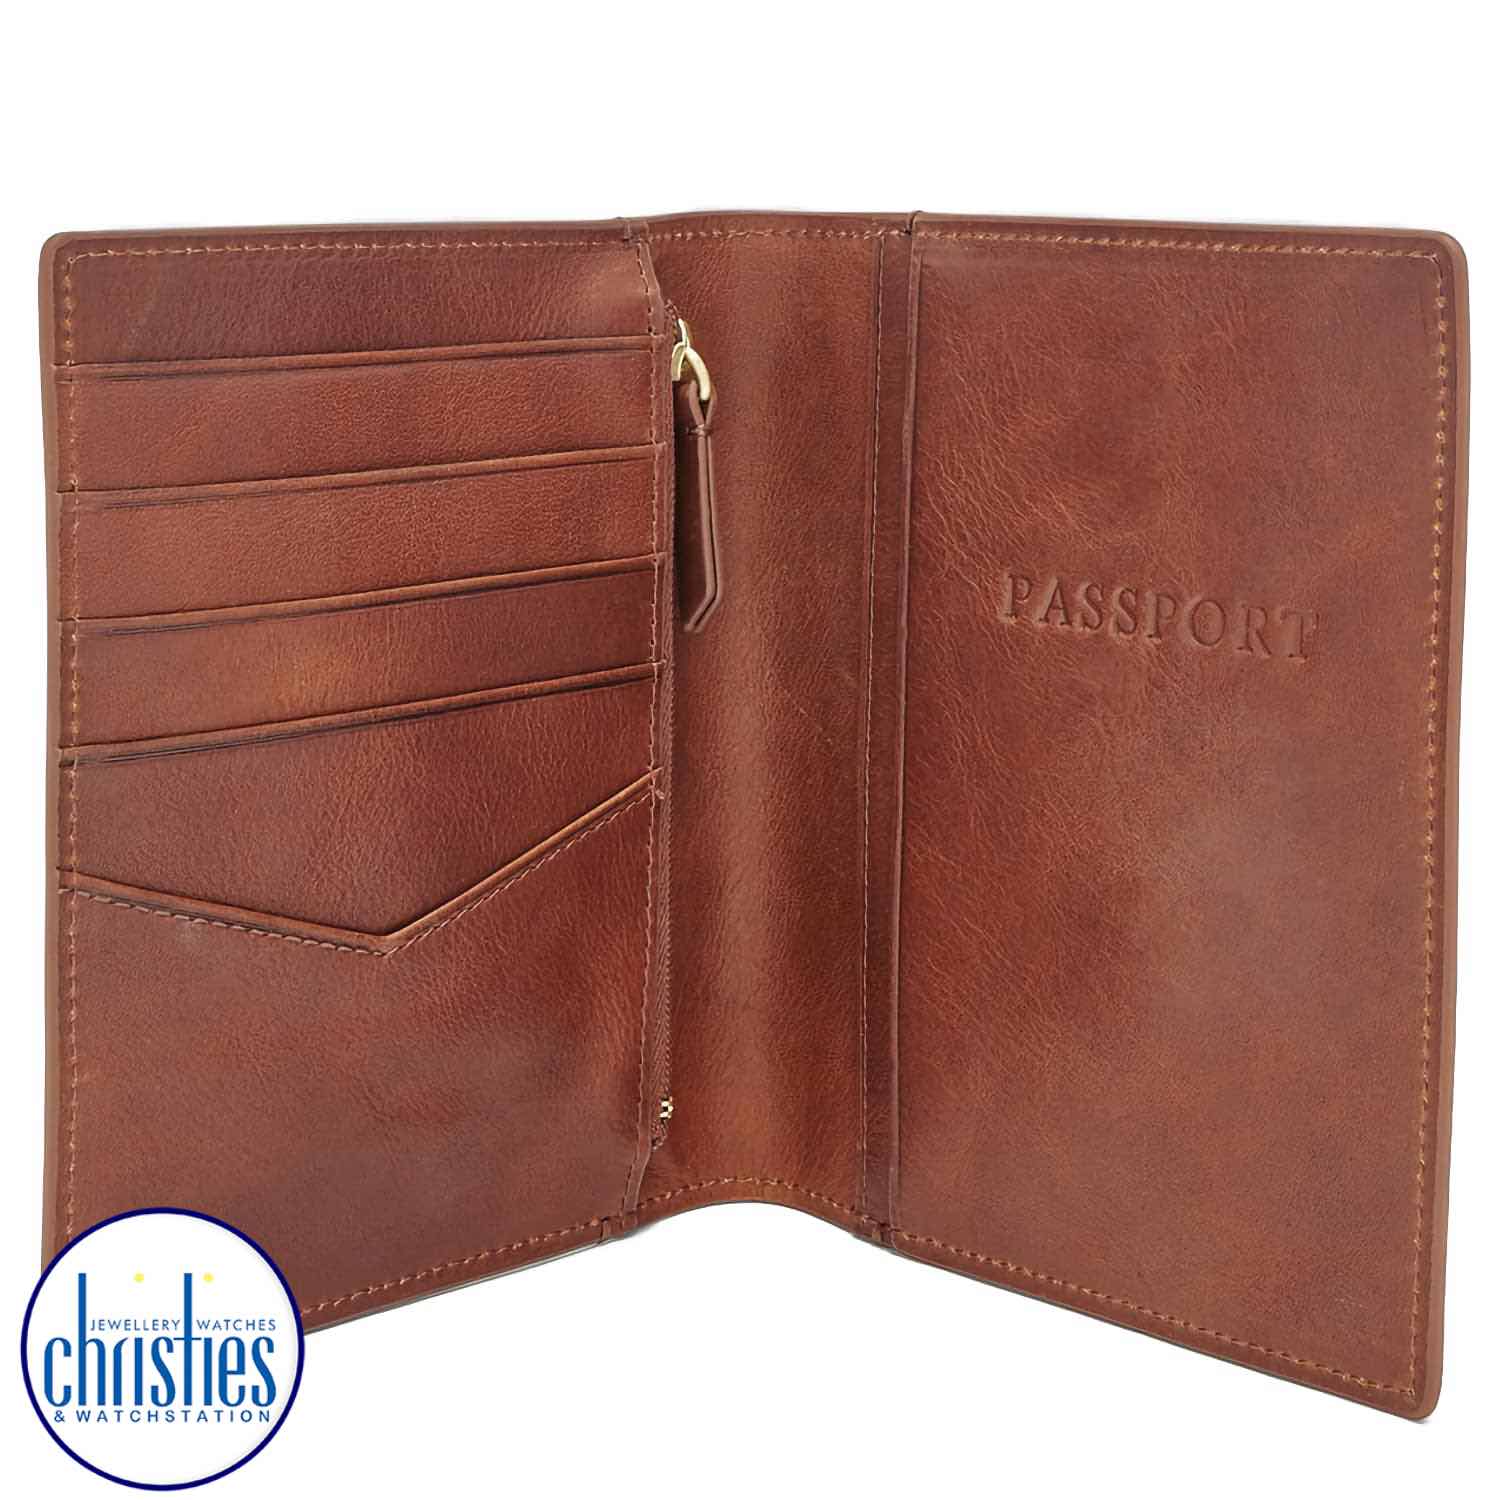 MLG0358222 Fossil Leather RFID Passport Case Cognac. This Fossil passport case features RFID blocking protecting your contents from electric charges.